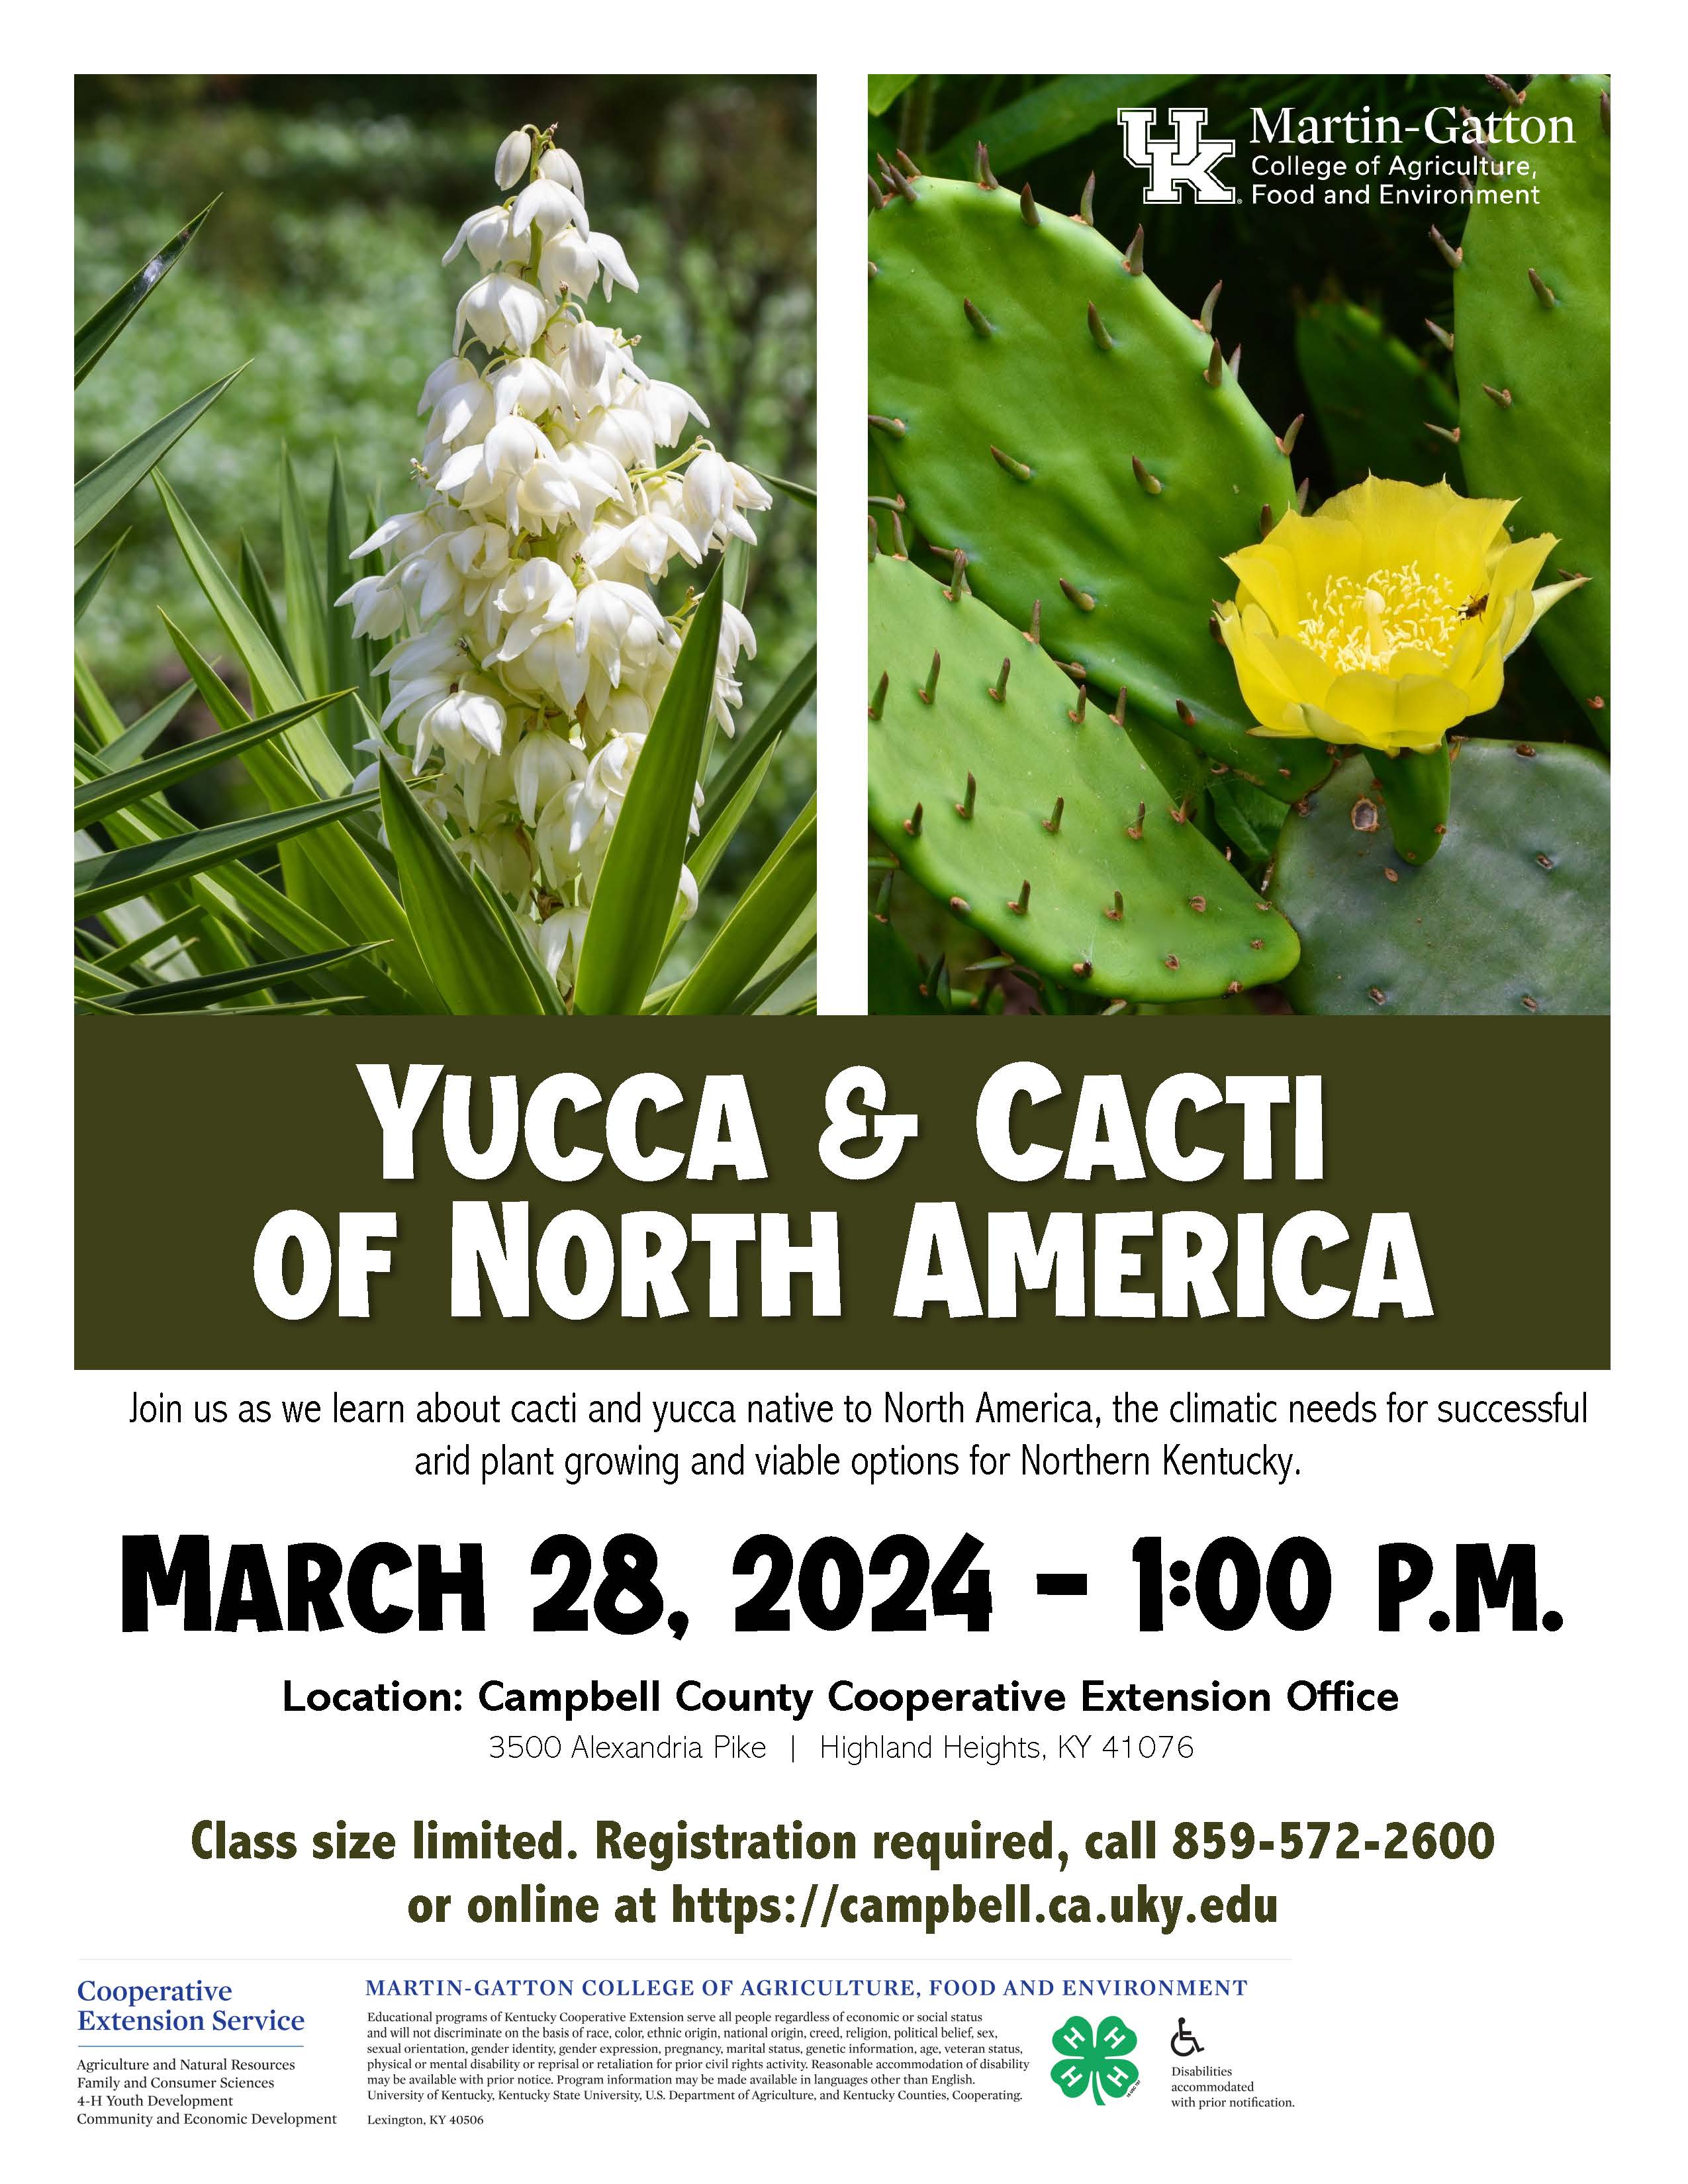 Cacti and Yucca of North America Flyer